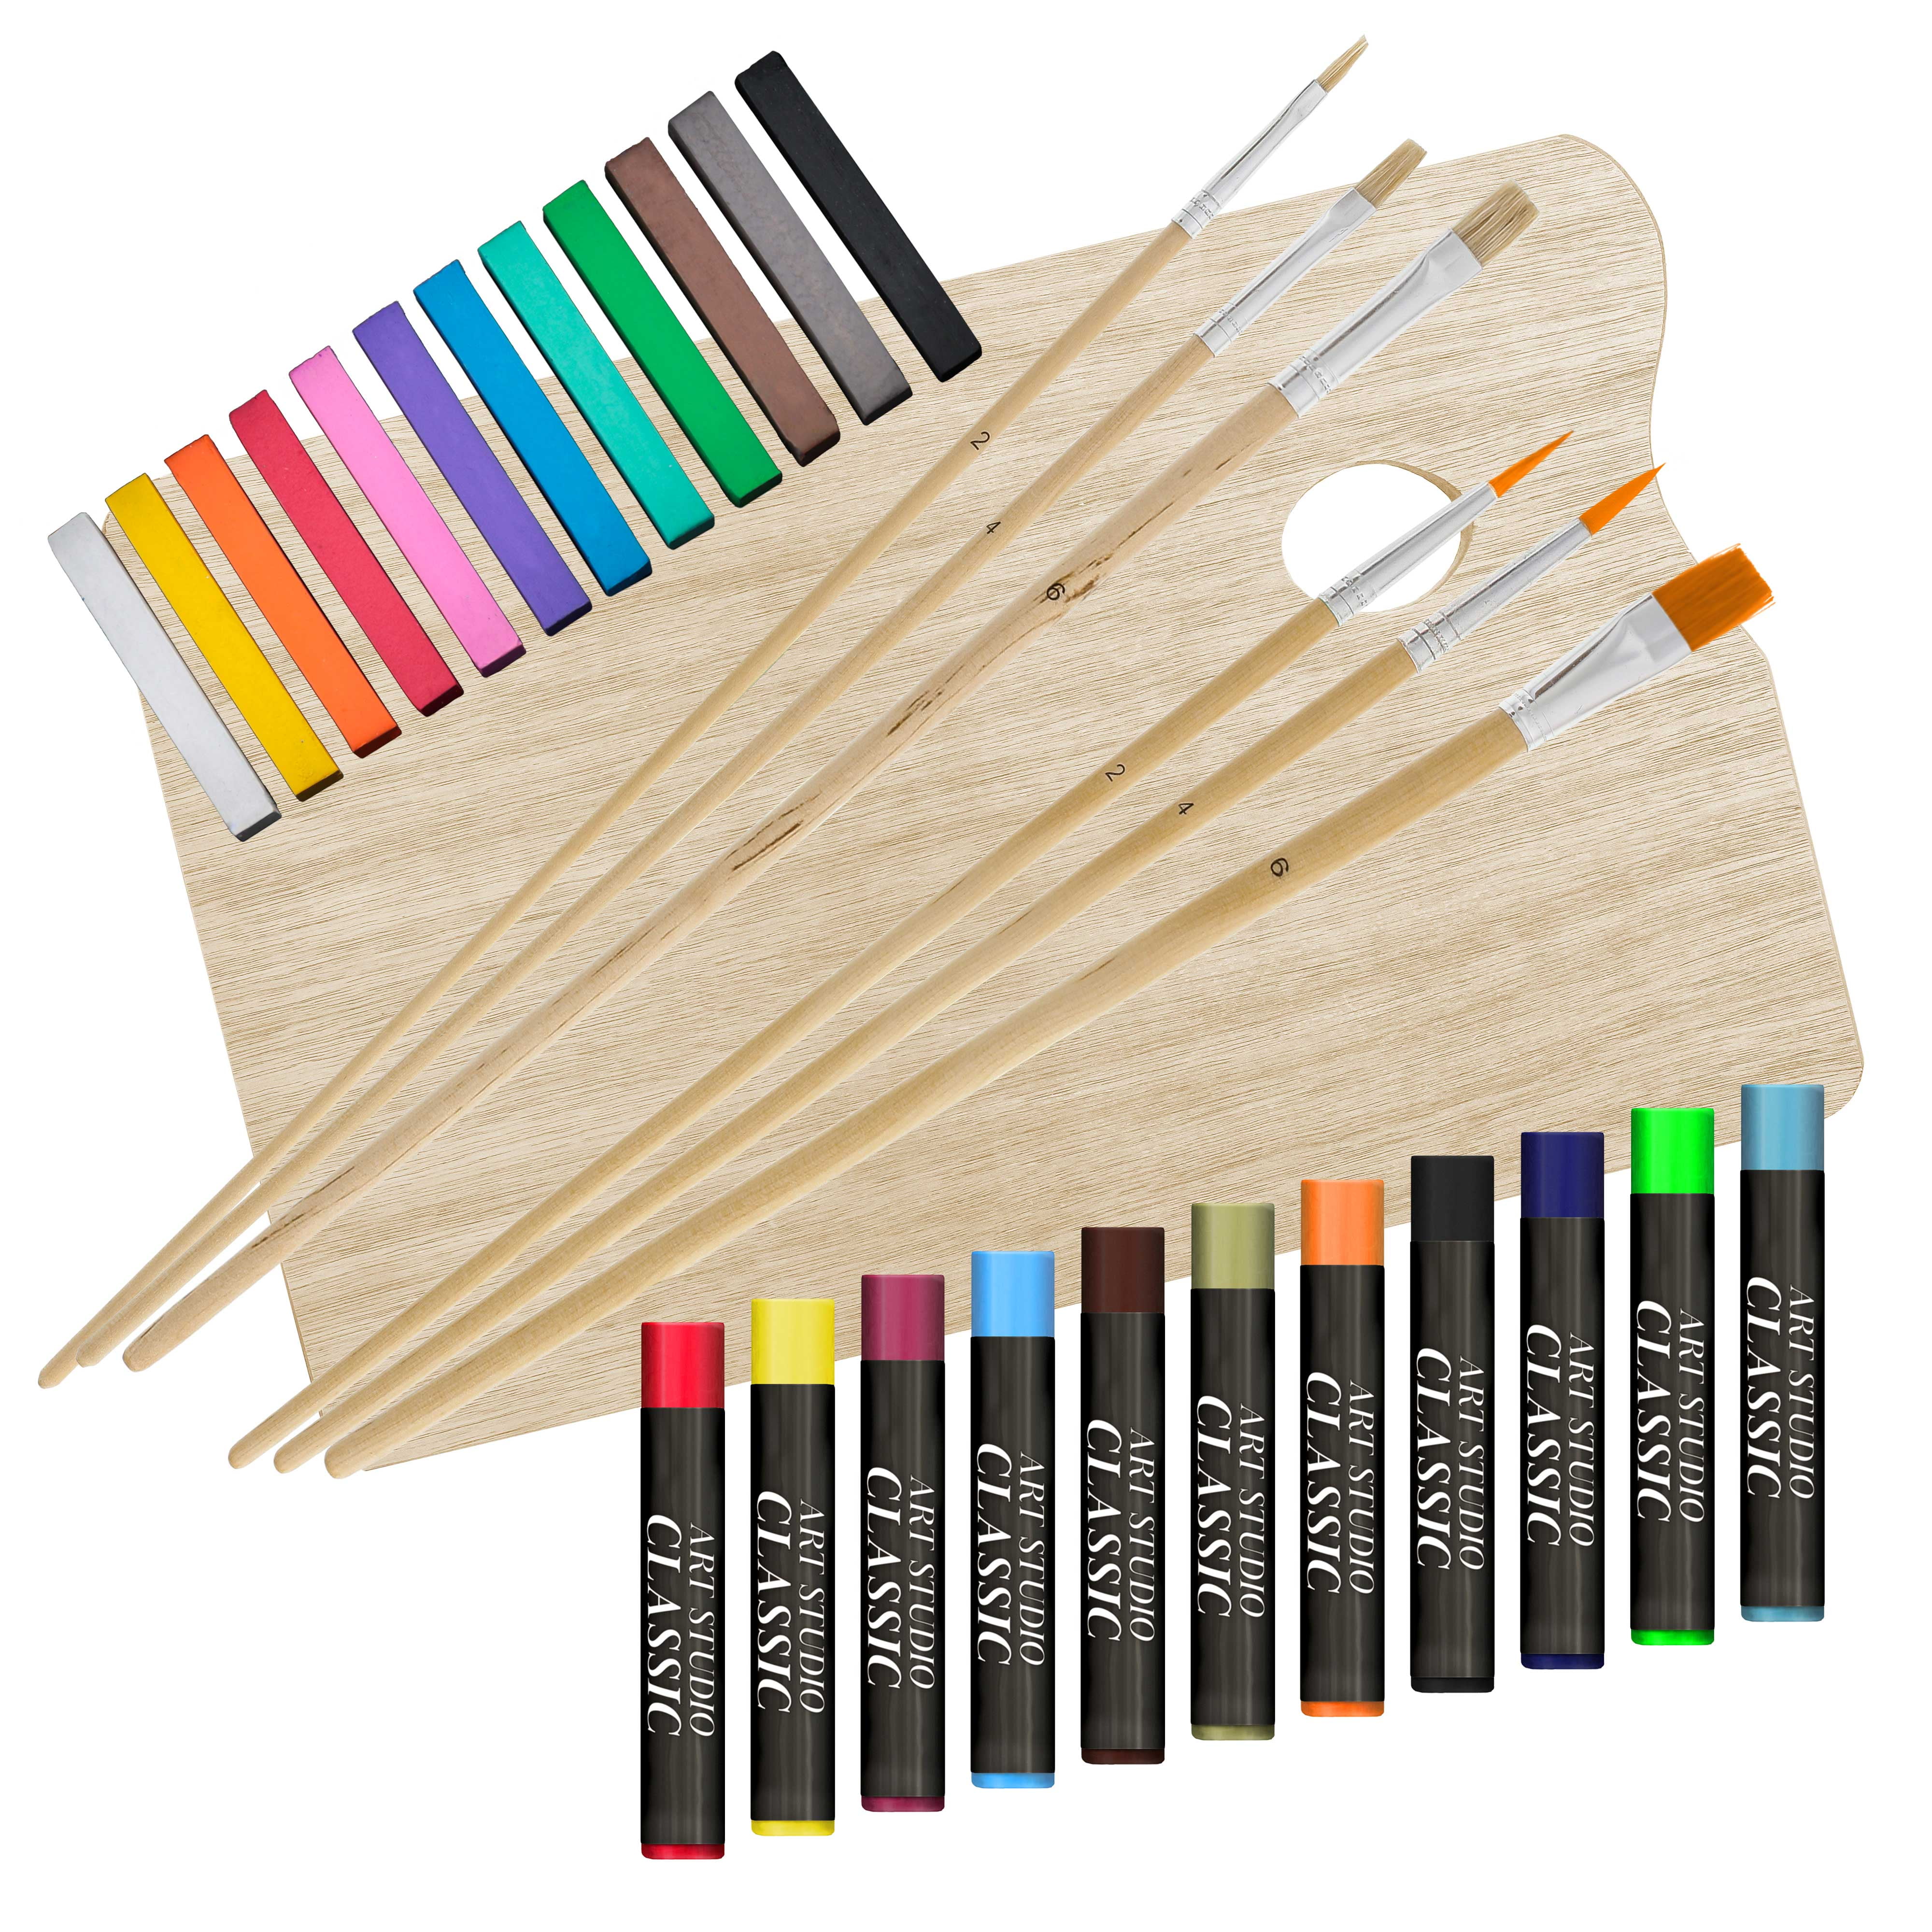 MERRIY 29-Piece Acrylic Paint Set, Painting Supplies Kit with Tabletop  Sketch Box Easel, 12 Colors Acrylic Paints,10x 12 Stretched  Canvas,Premium